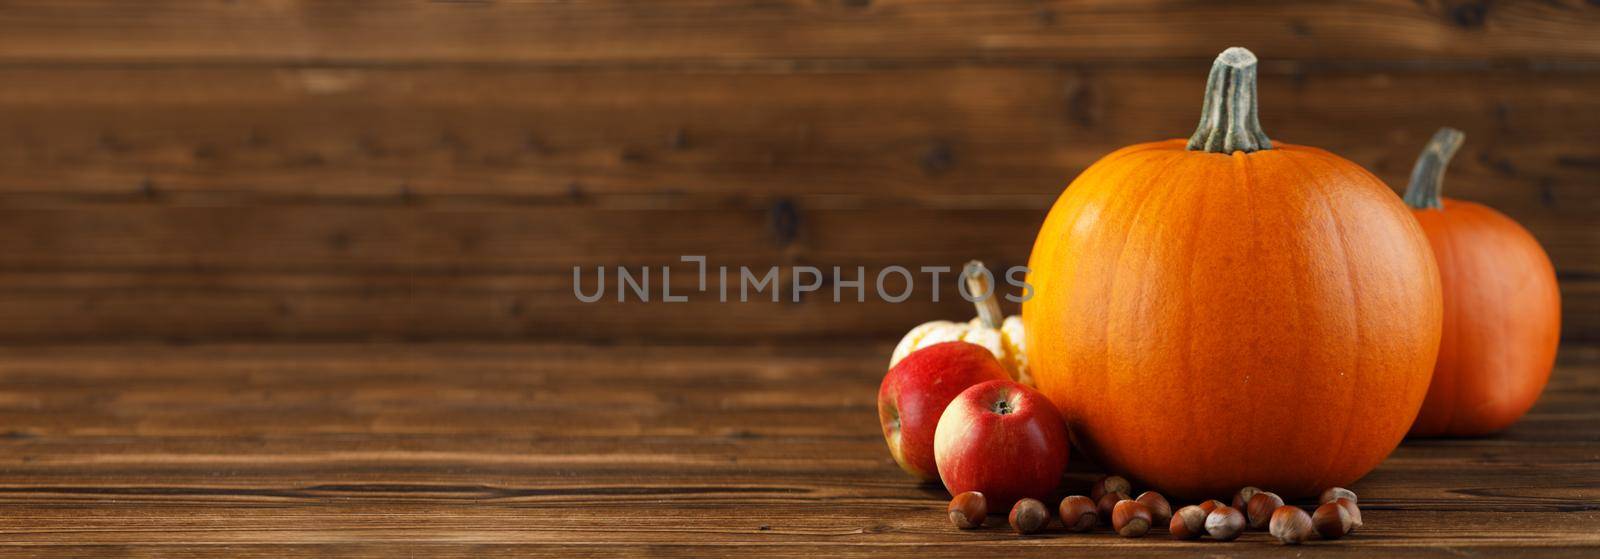 Wood background with pumpkins, apples and nuts. Copy space for text